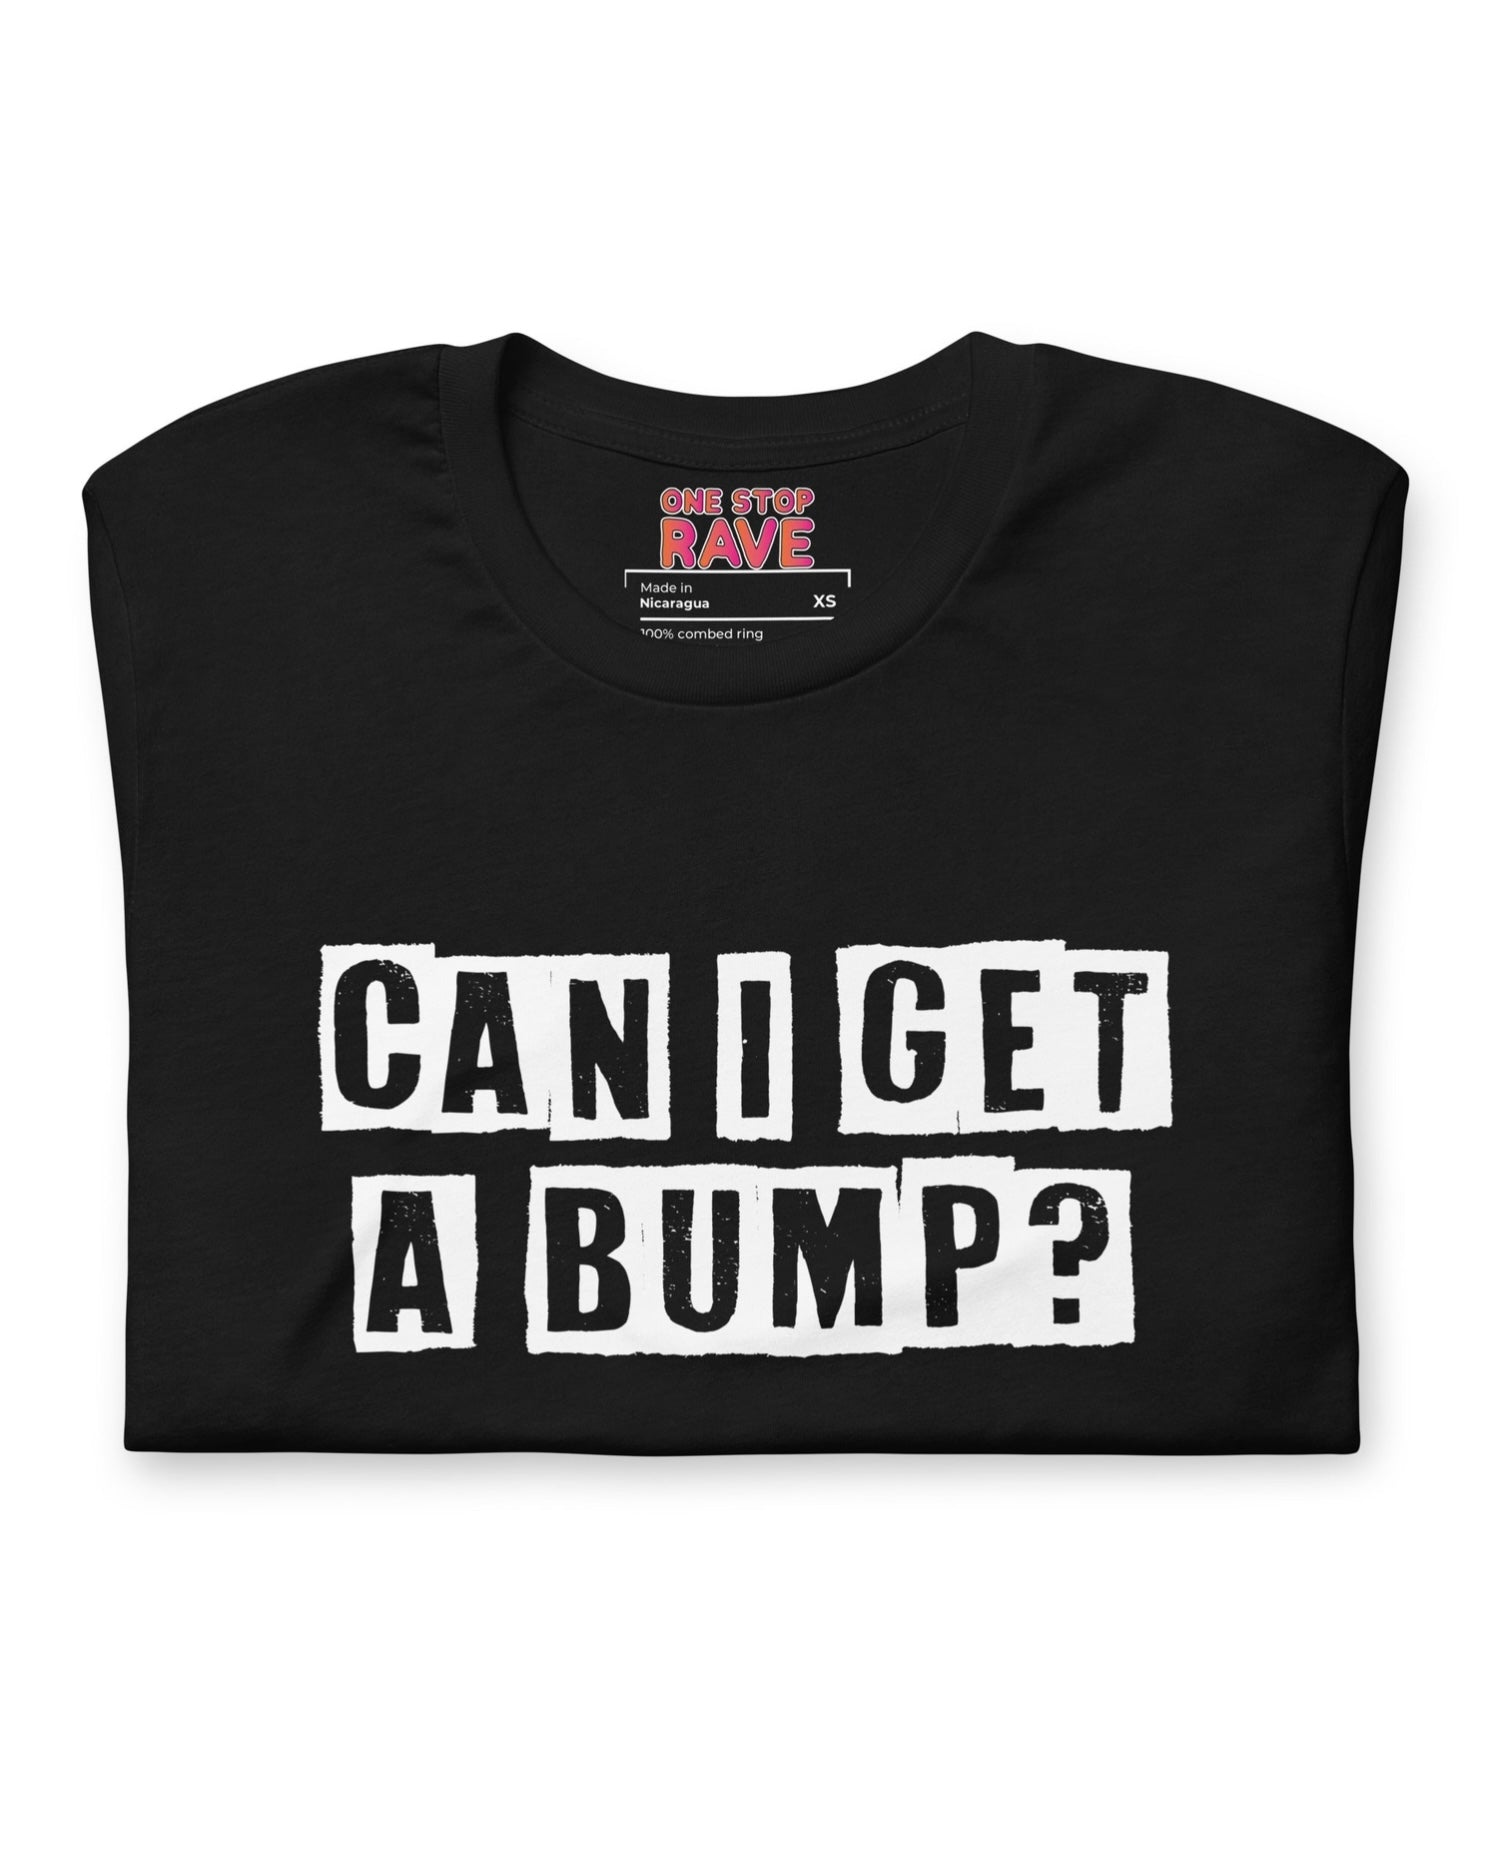 A folded black t-shirt with the phrase "CAN I GET A BUMP?" & OSR label.